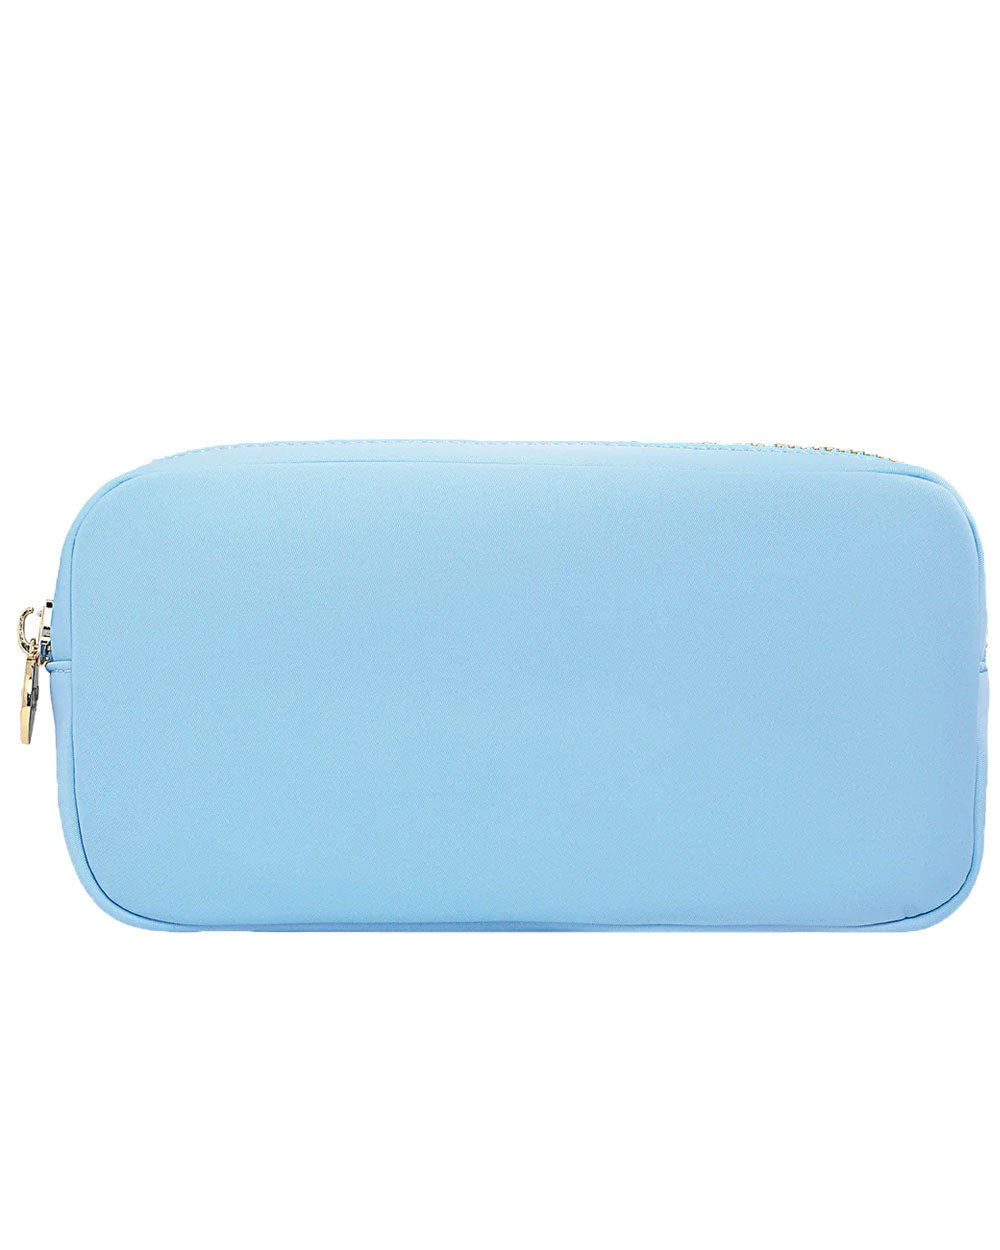 Classic Small Pouch in Periwinkle